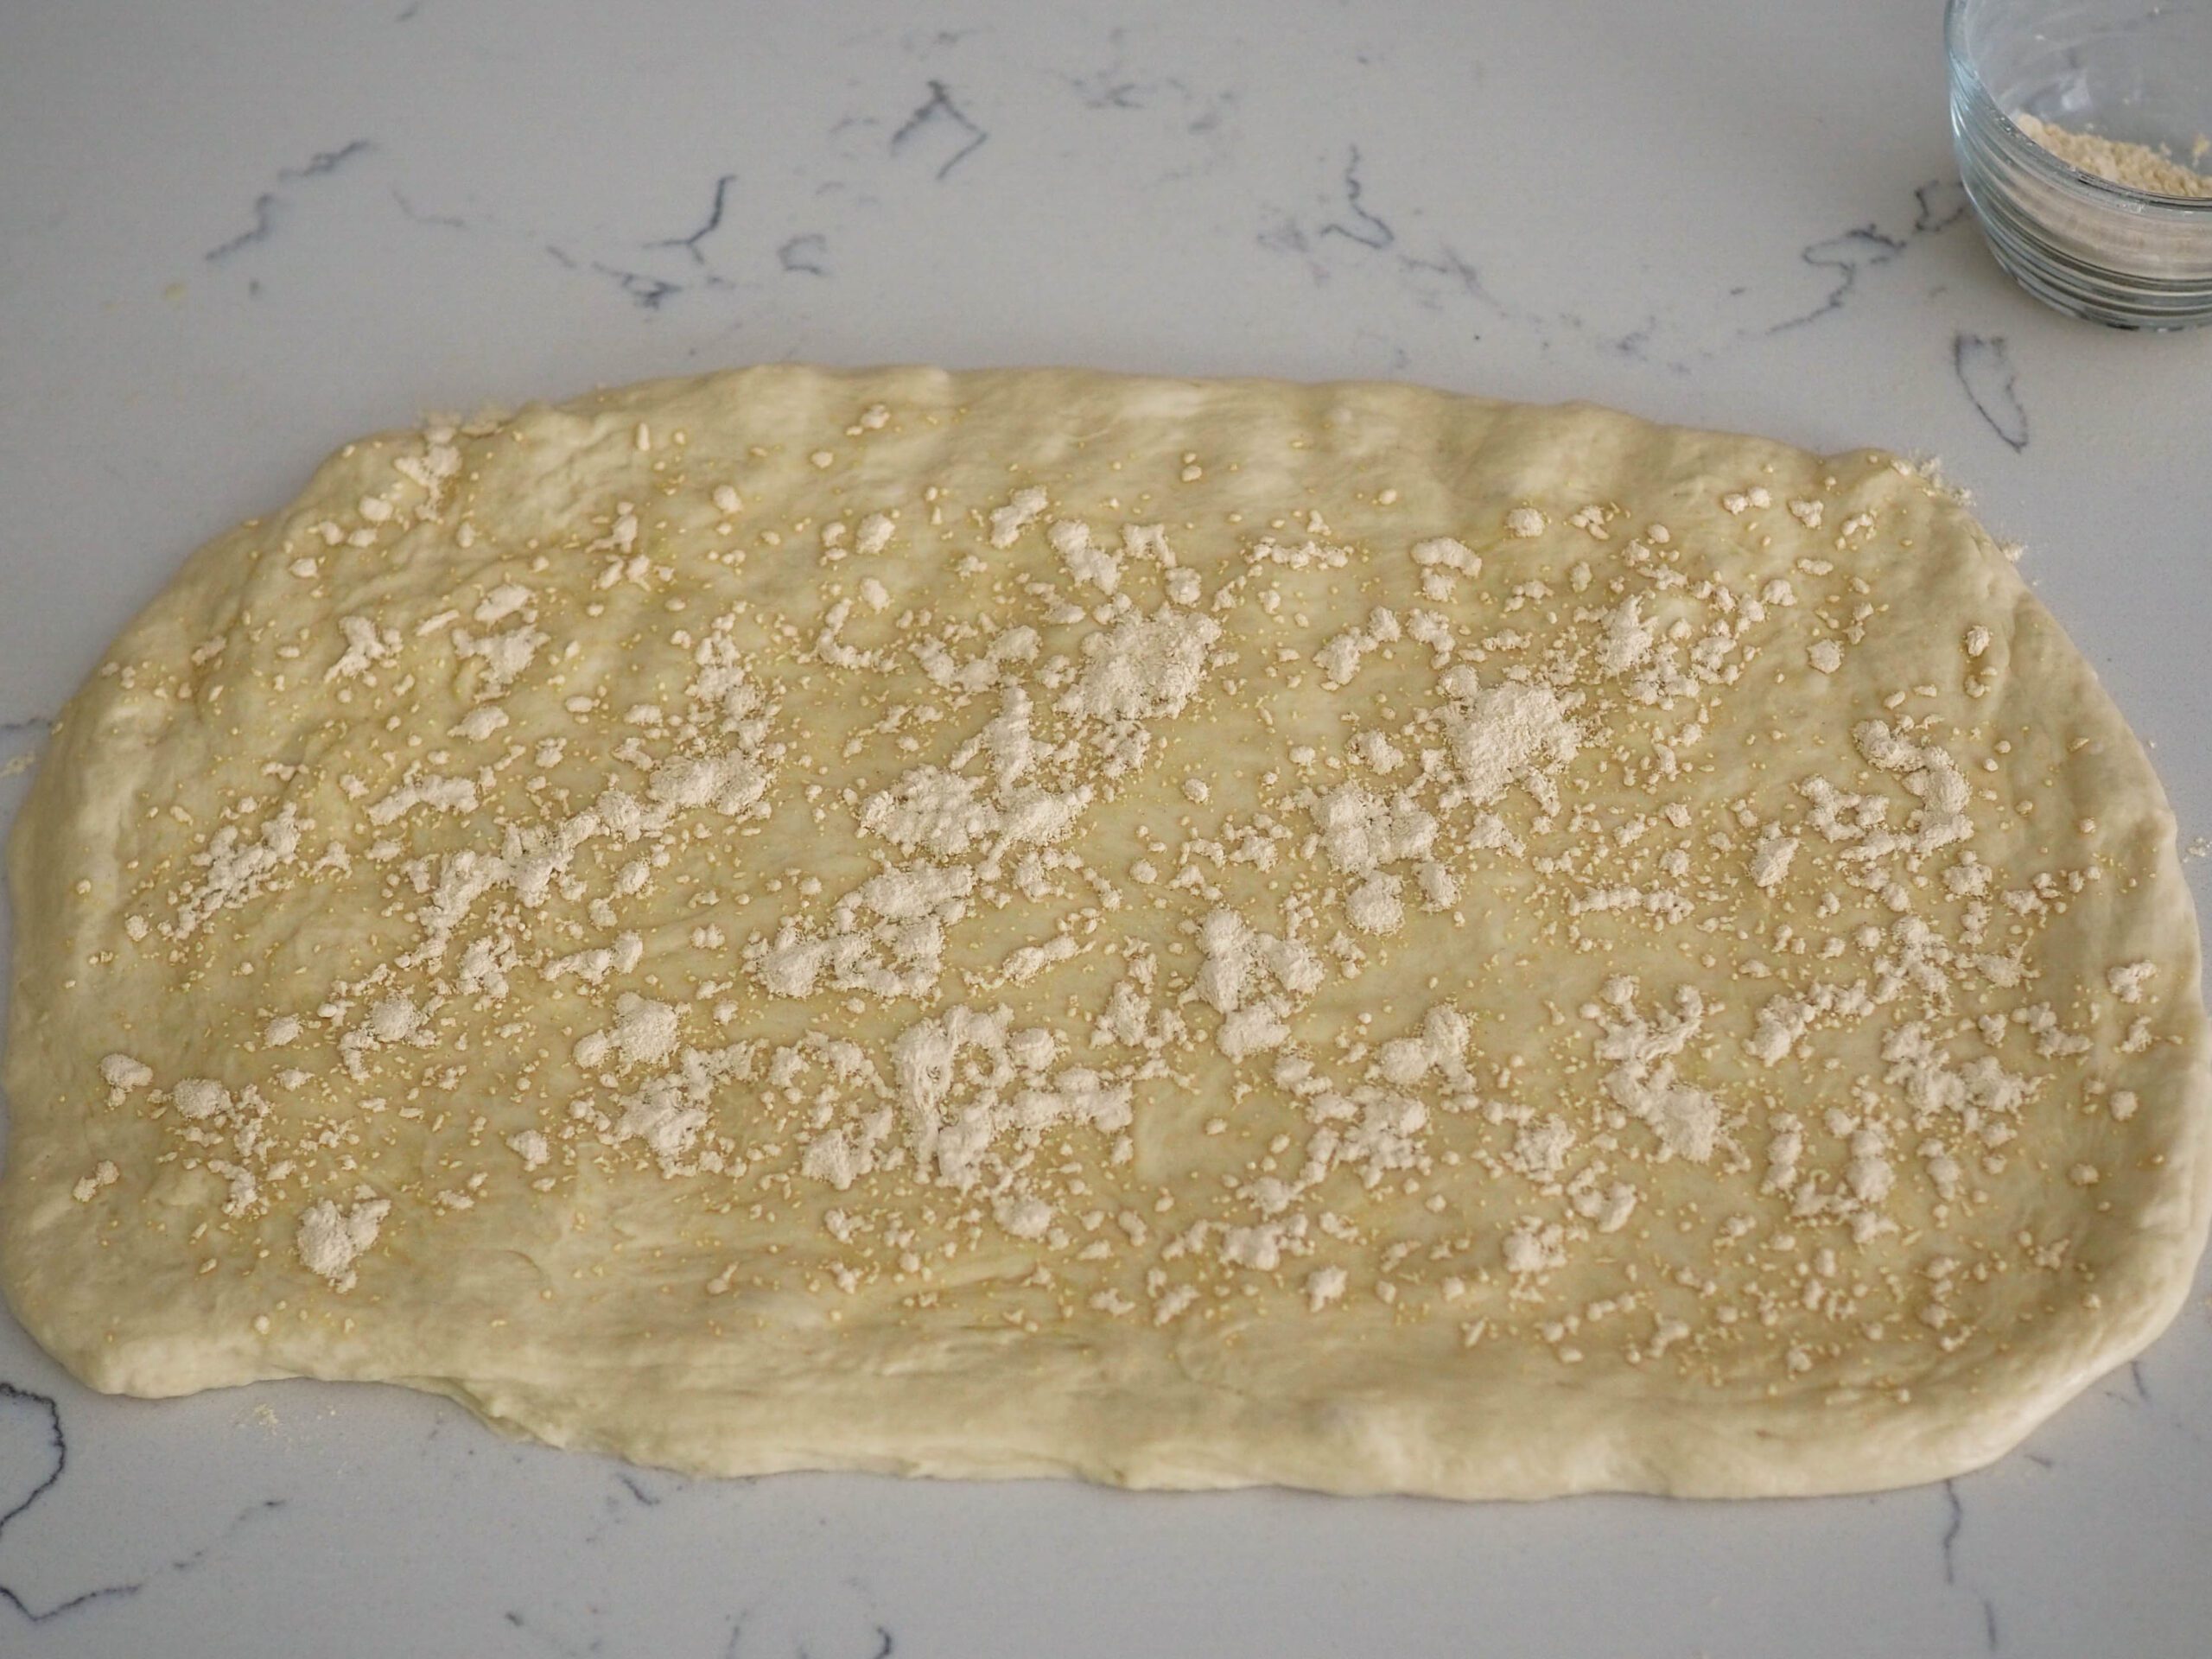 A rectangle of French bread dough with garlic powder sprinkled unevenly on top of it.